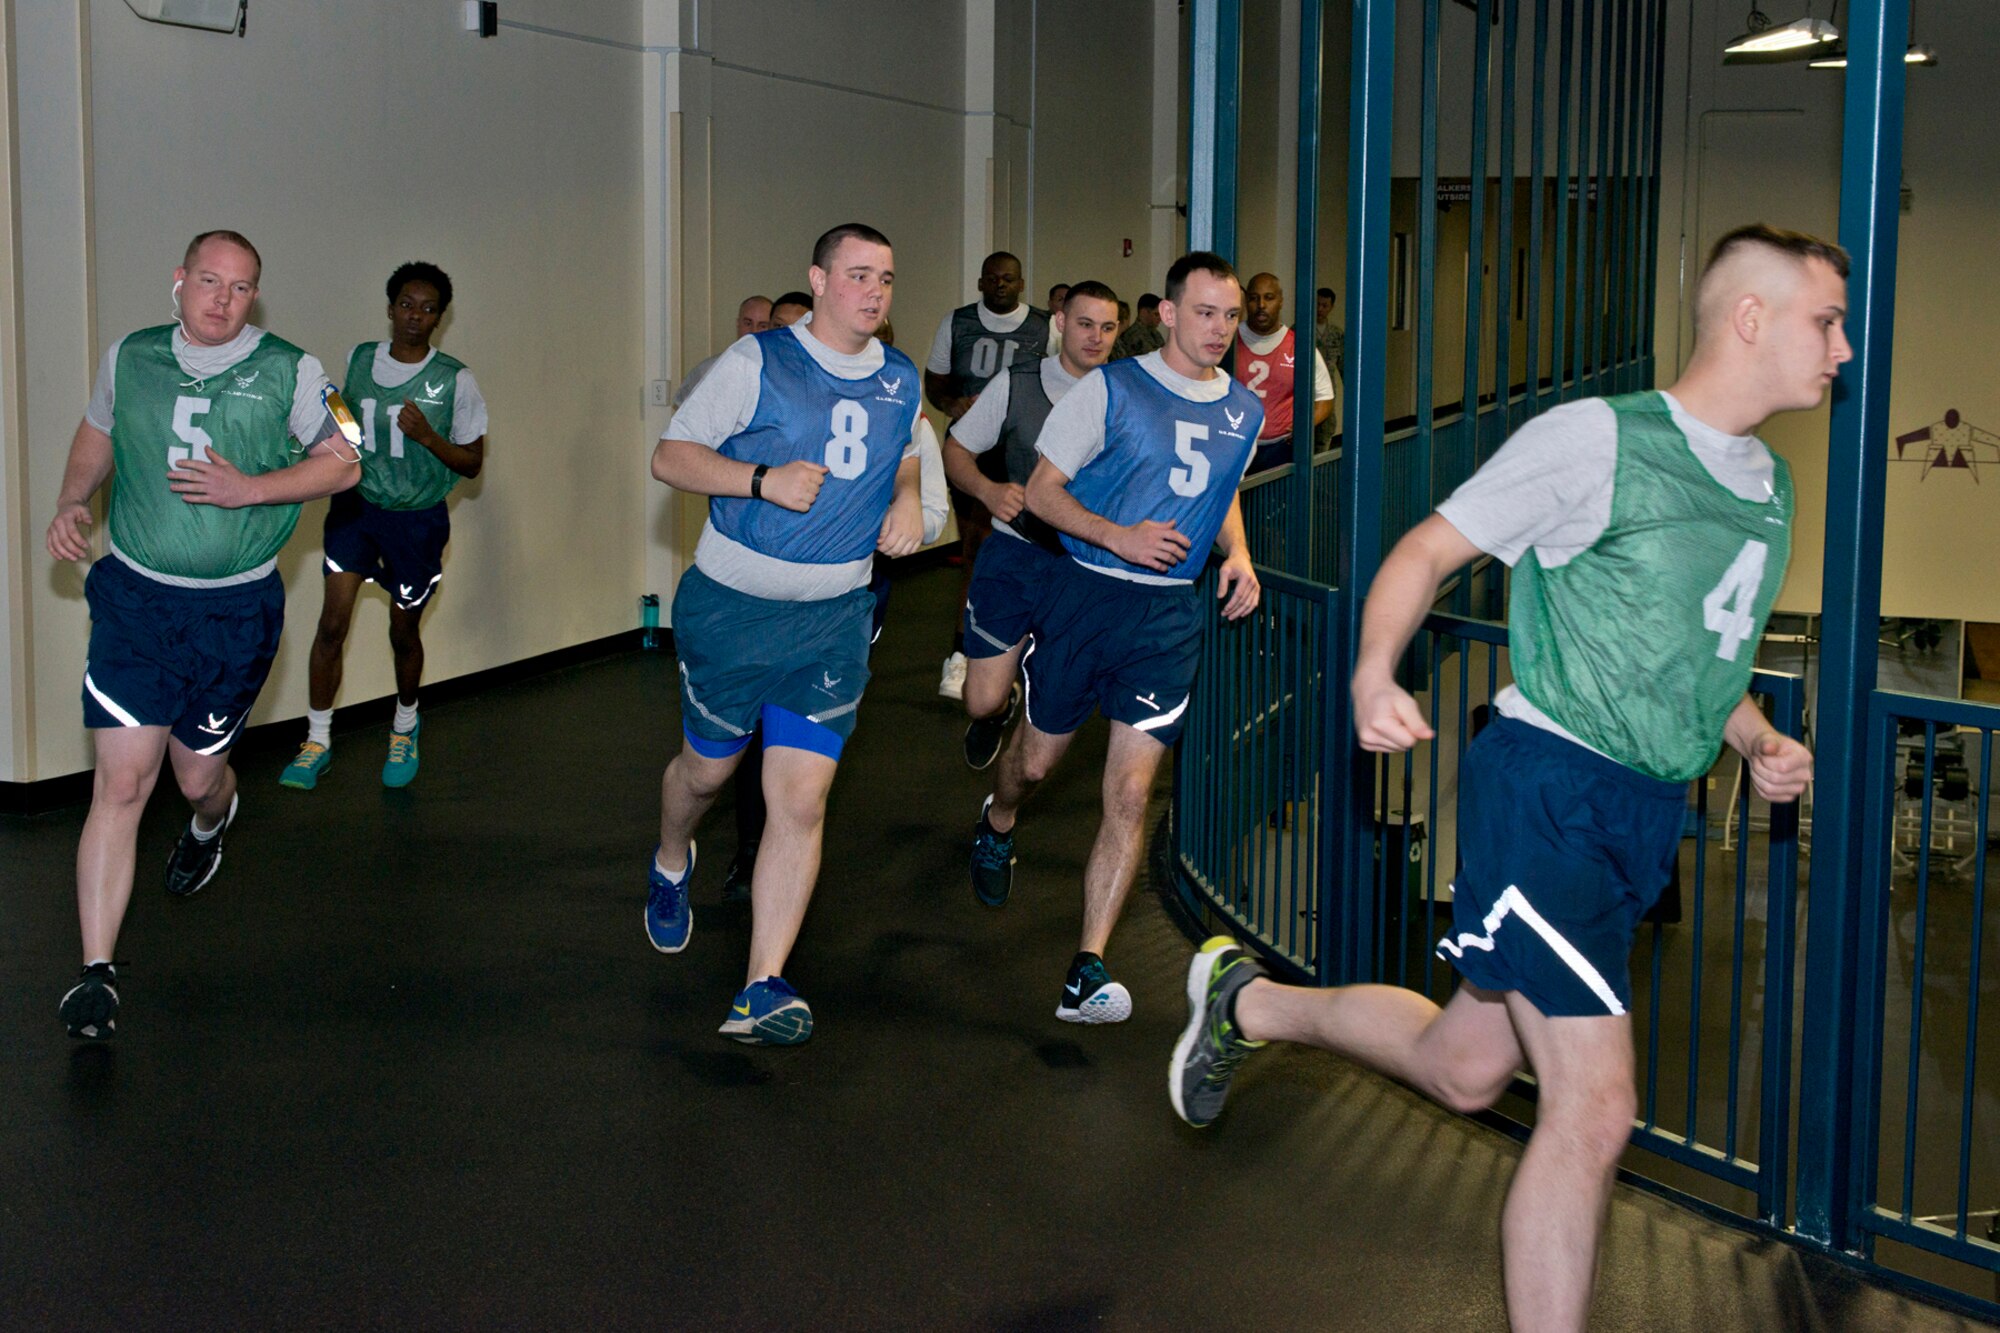 U.S. Air Force Reservists assigned to the 913th Airlift Group participate in the run portion of their physical fitness assessment test at Little Rock Air Force Base, Ark., Jan. 9, 2016. Many Airmen push themselves to score 90 or above, which allows them to test annually, rather than biannually. (U.S. Air Force photo by Master Sgt. Jeff Walston/Released)